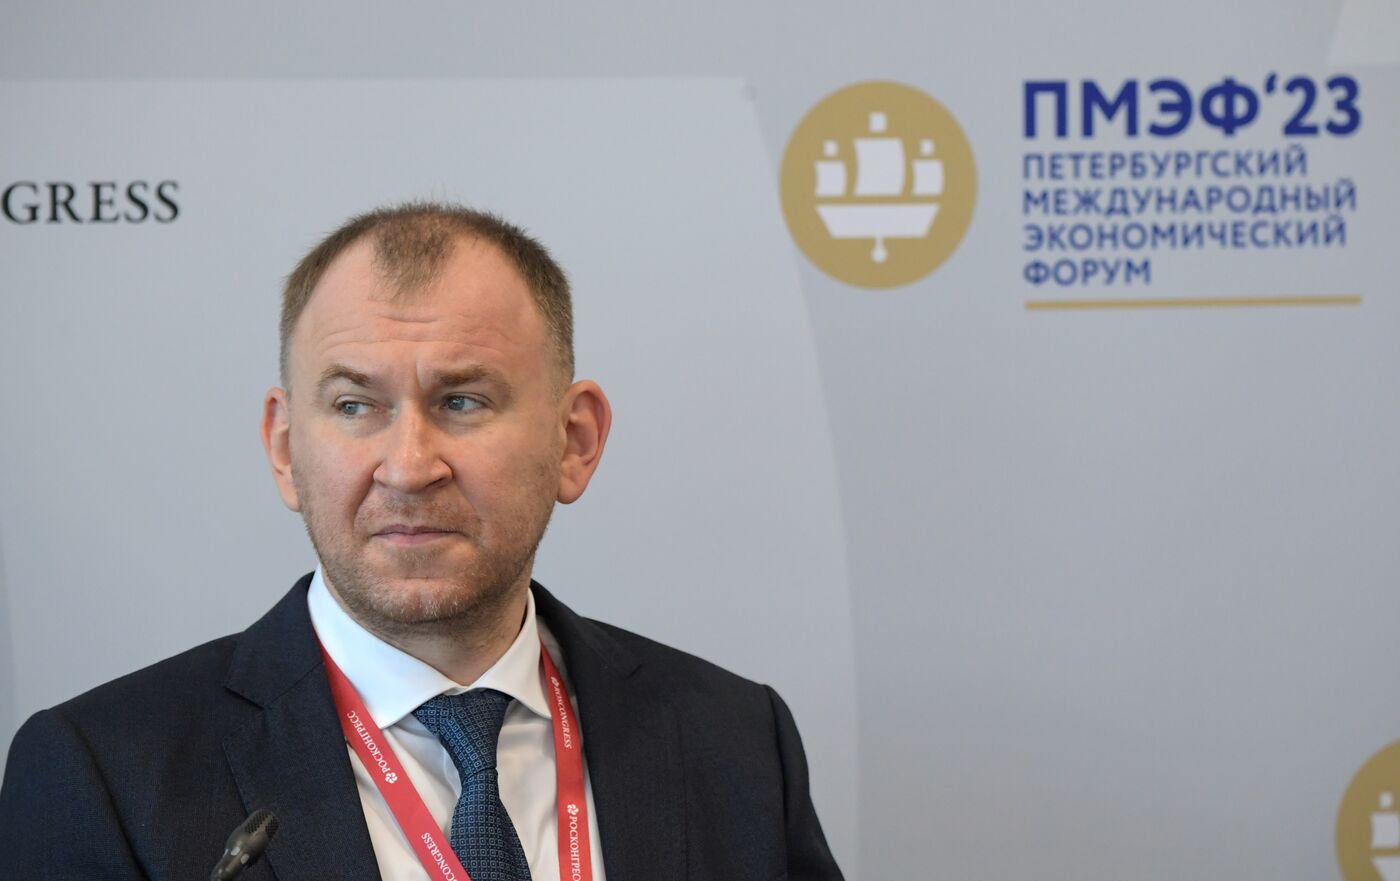 SPIEF-2023. Export Potential as a Driver For the Development of IT in Russia